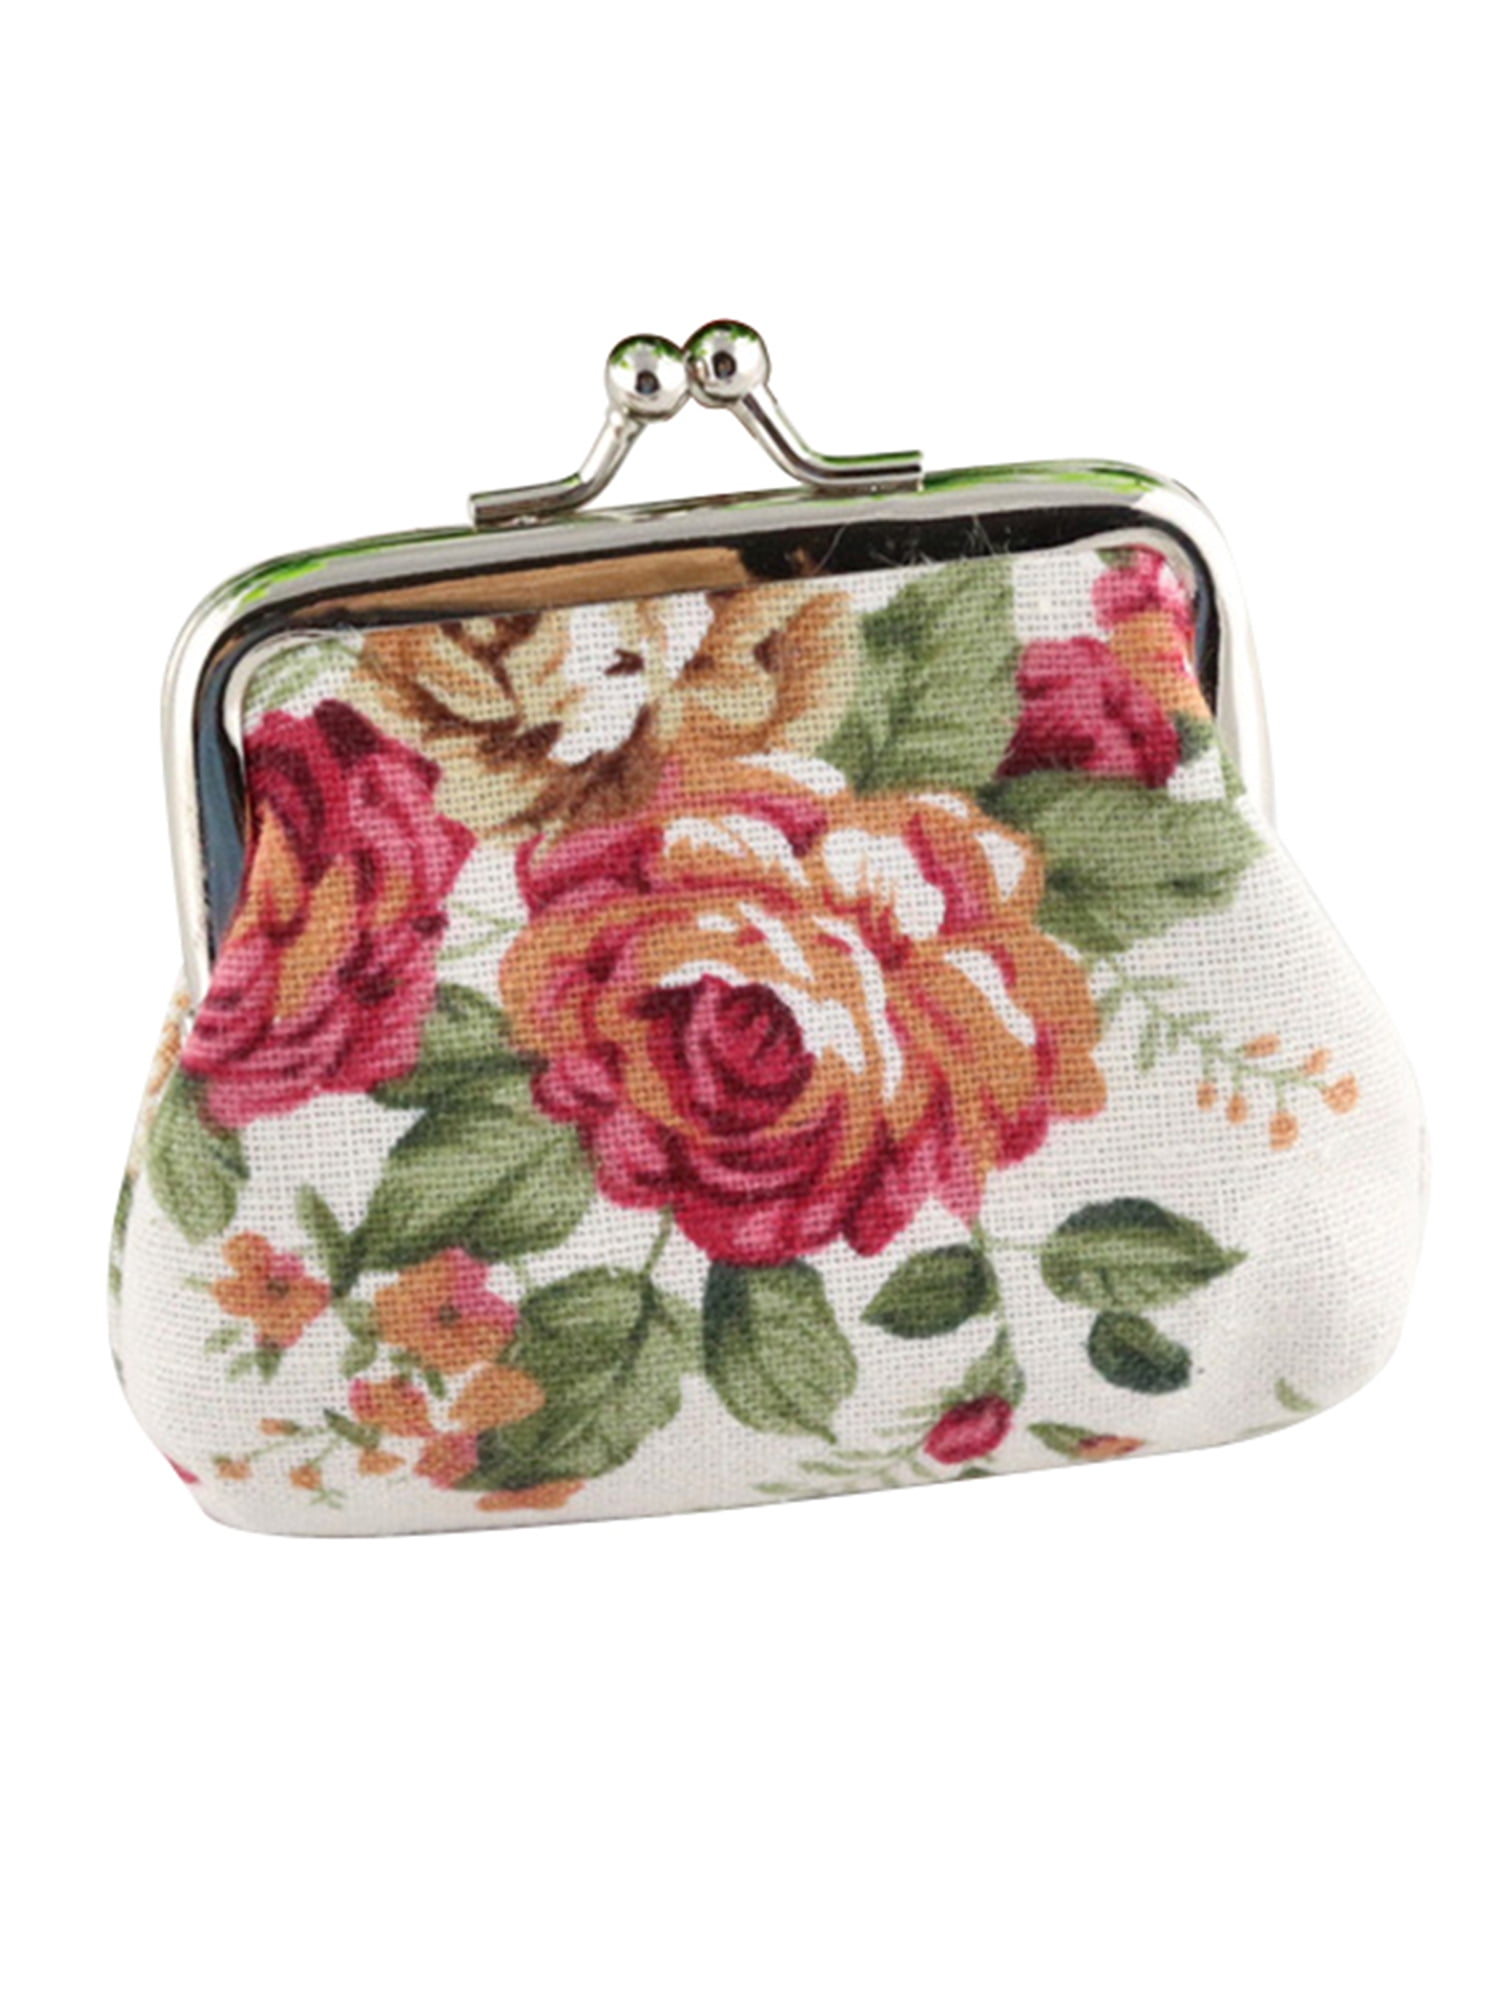 Women's Vintage Floral Change Coin Purse Hasp Clutch Bag Holder Small ...